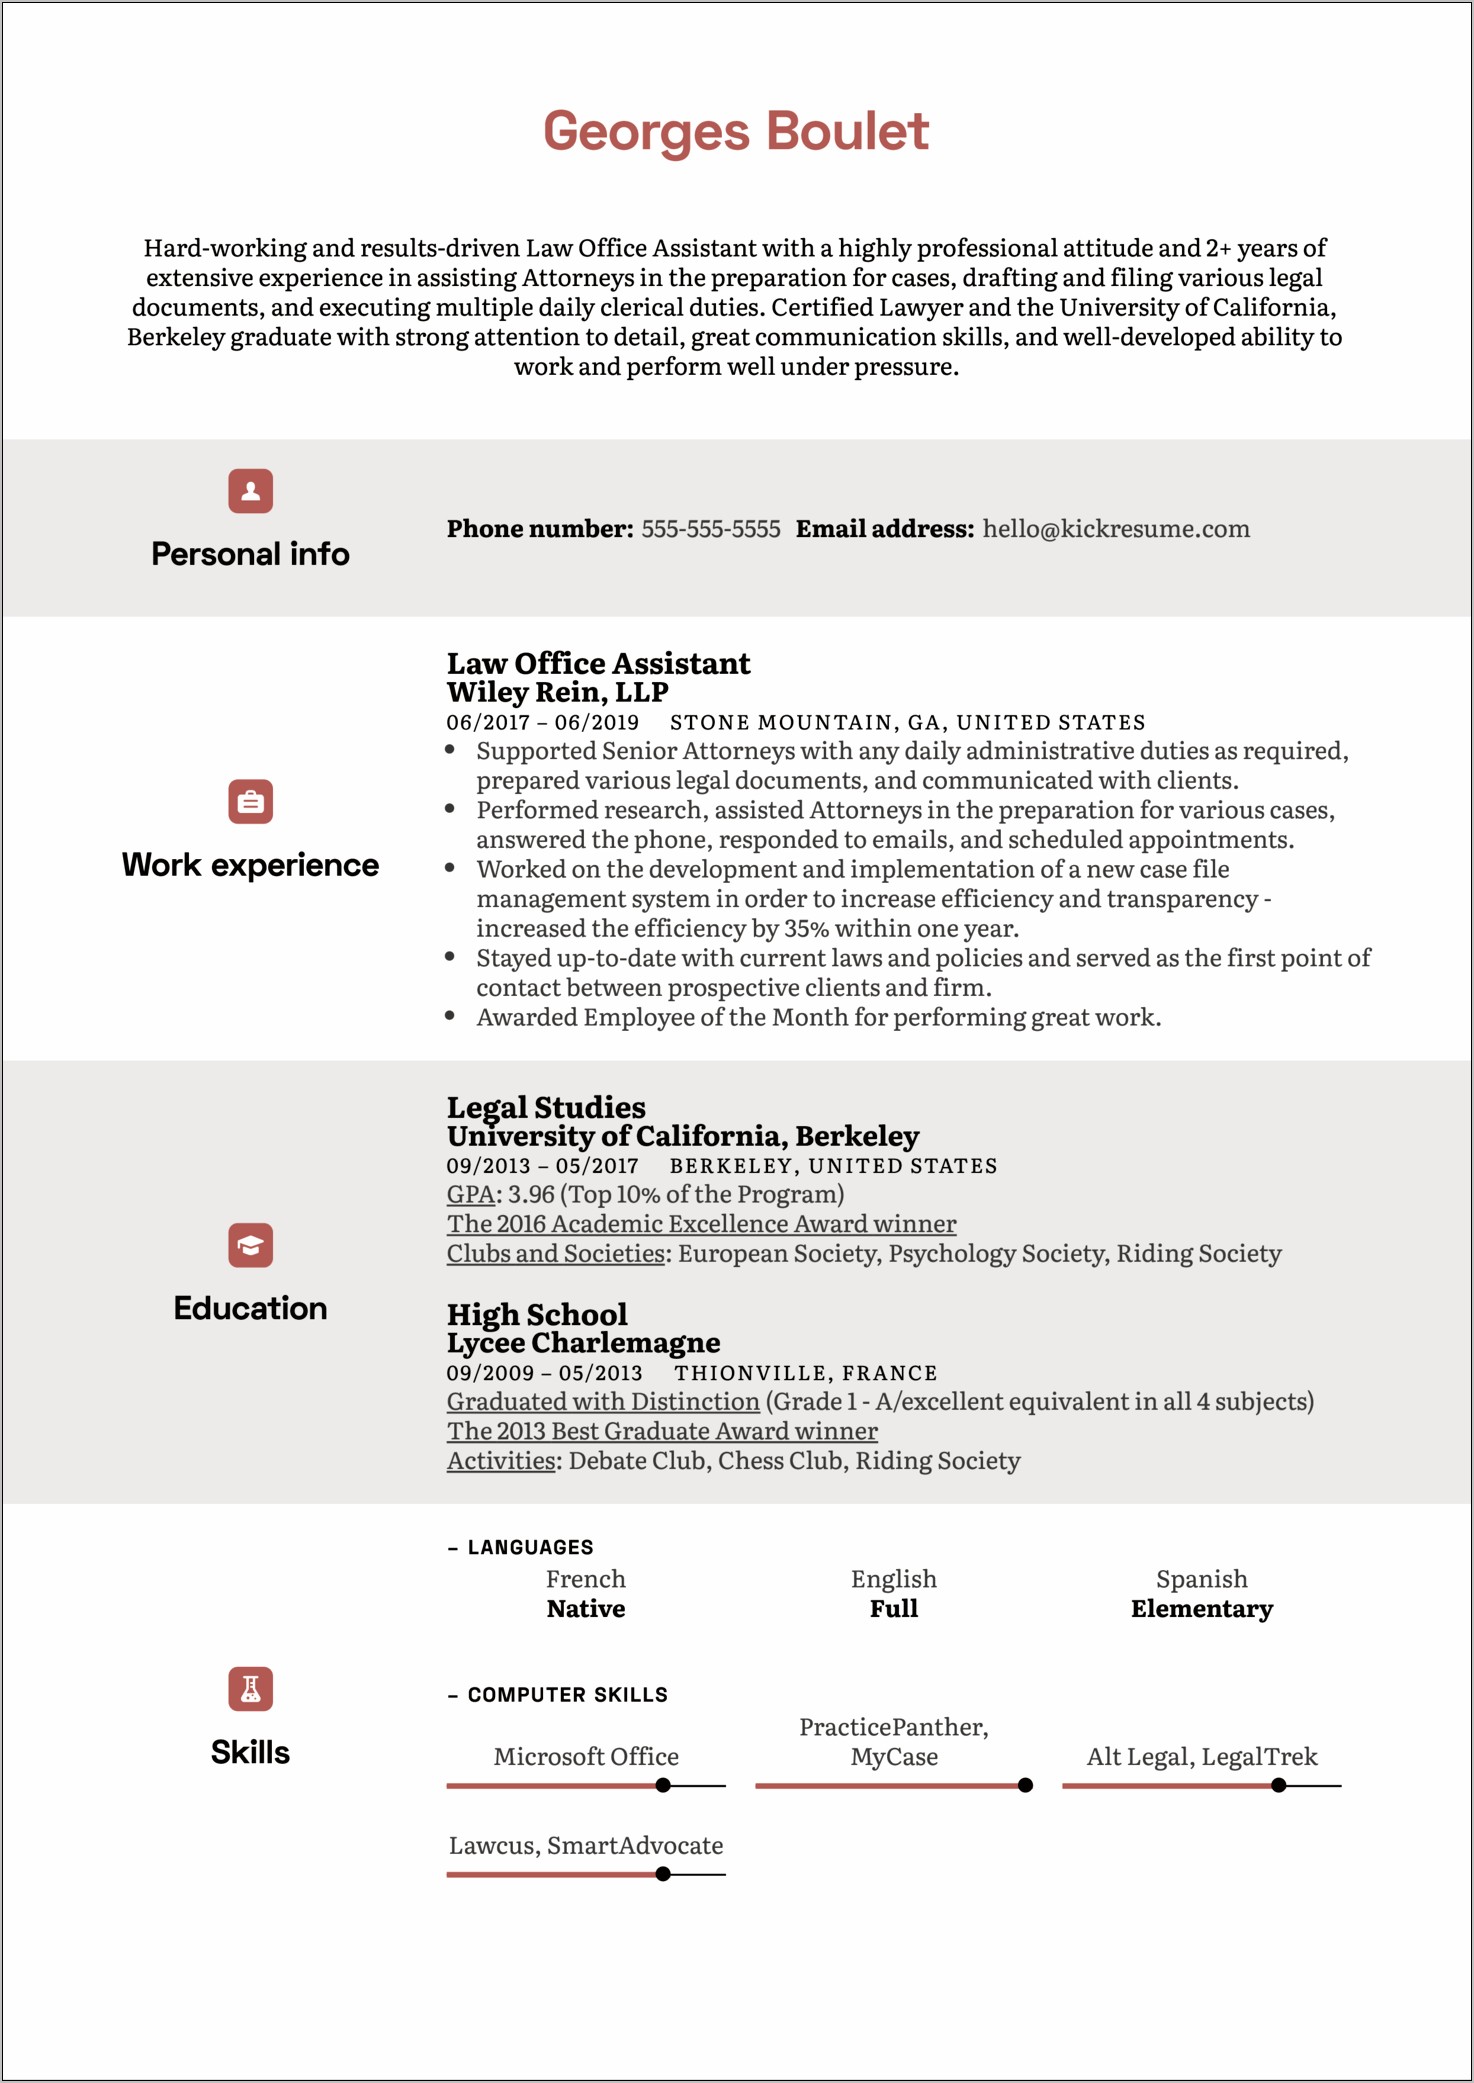 Sample Resume For Receptionist In Law Firm